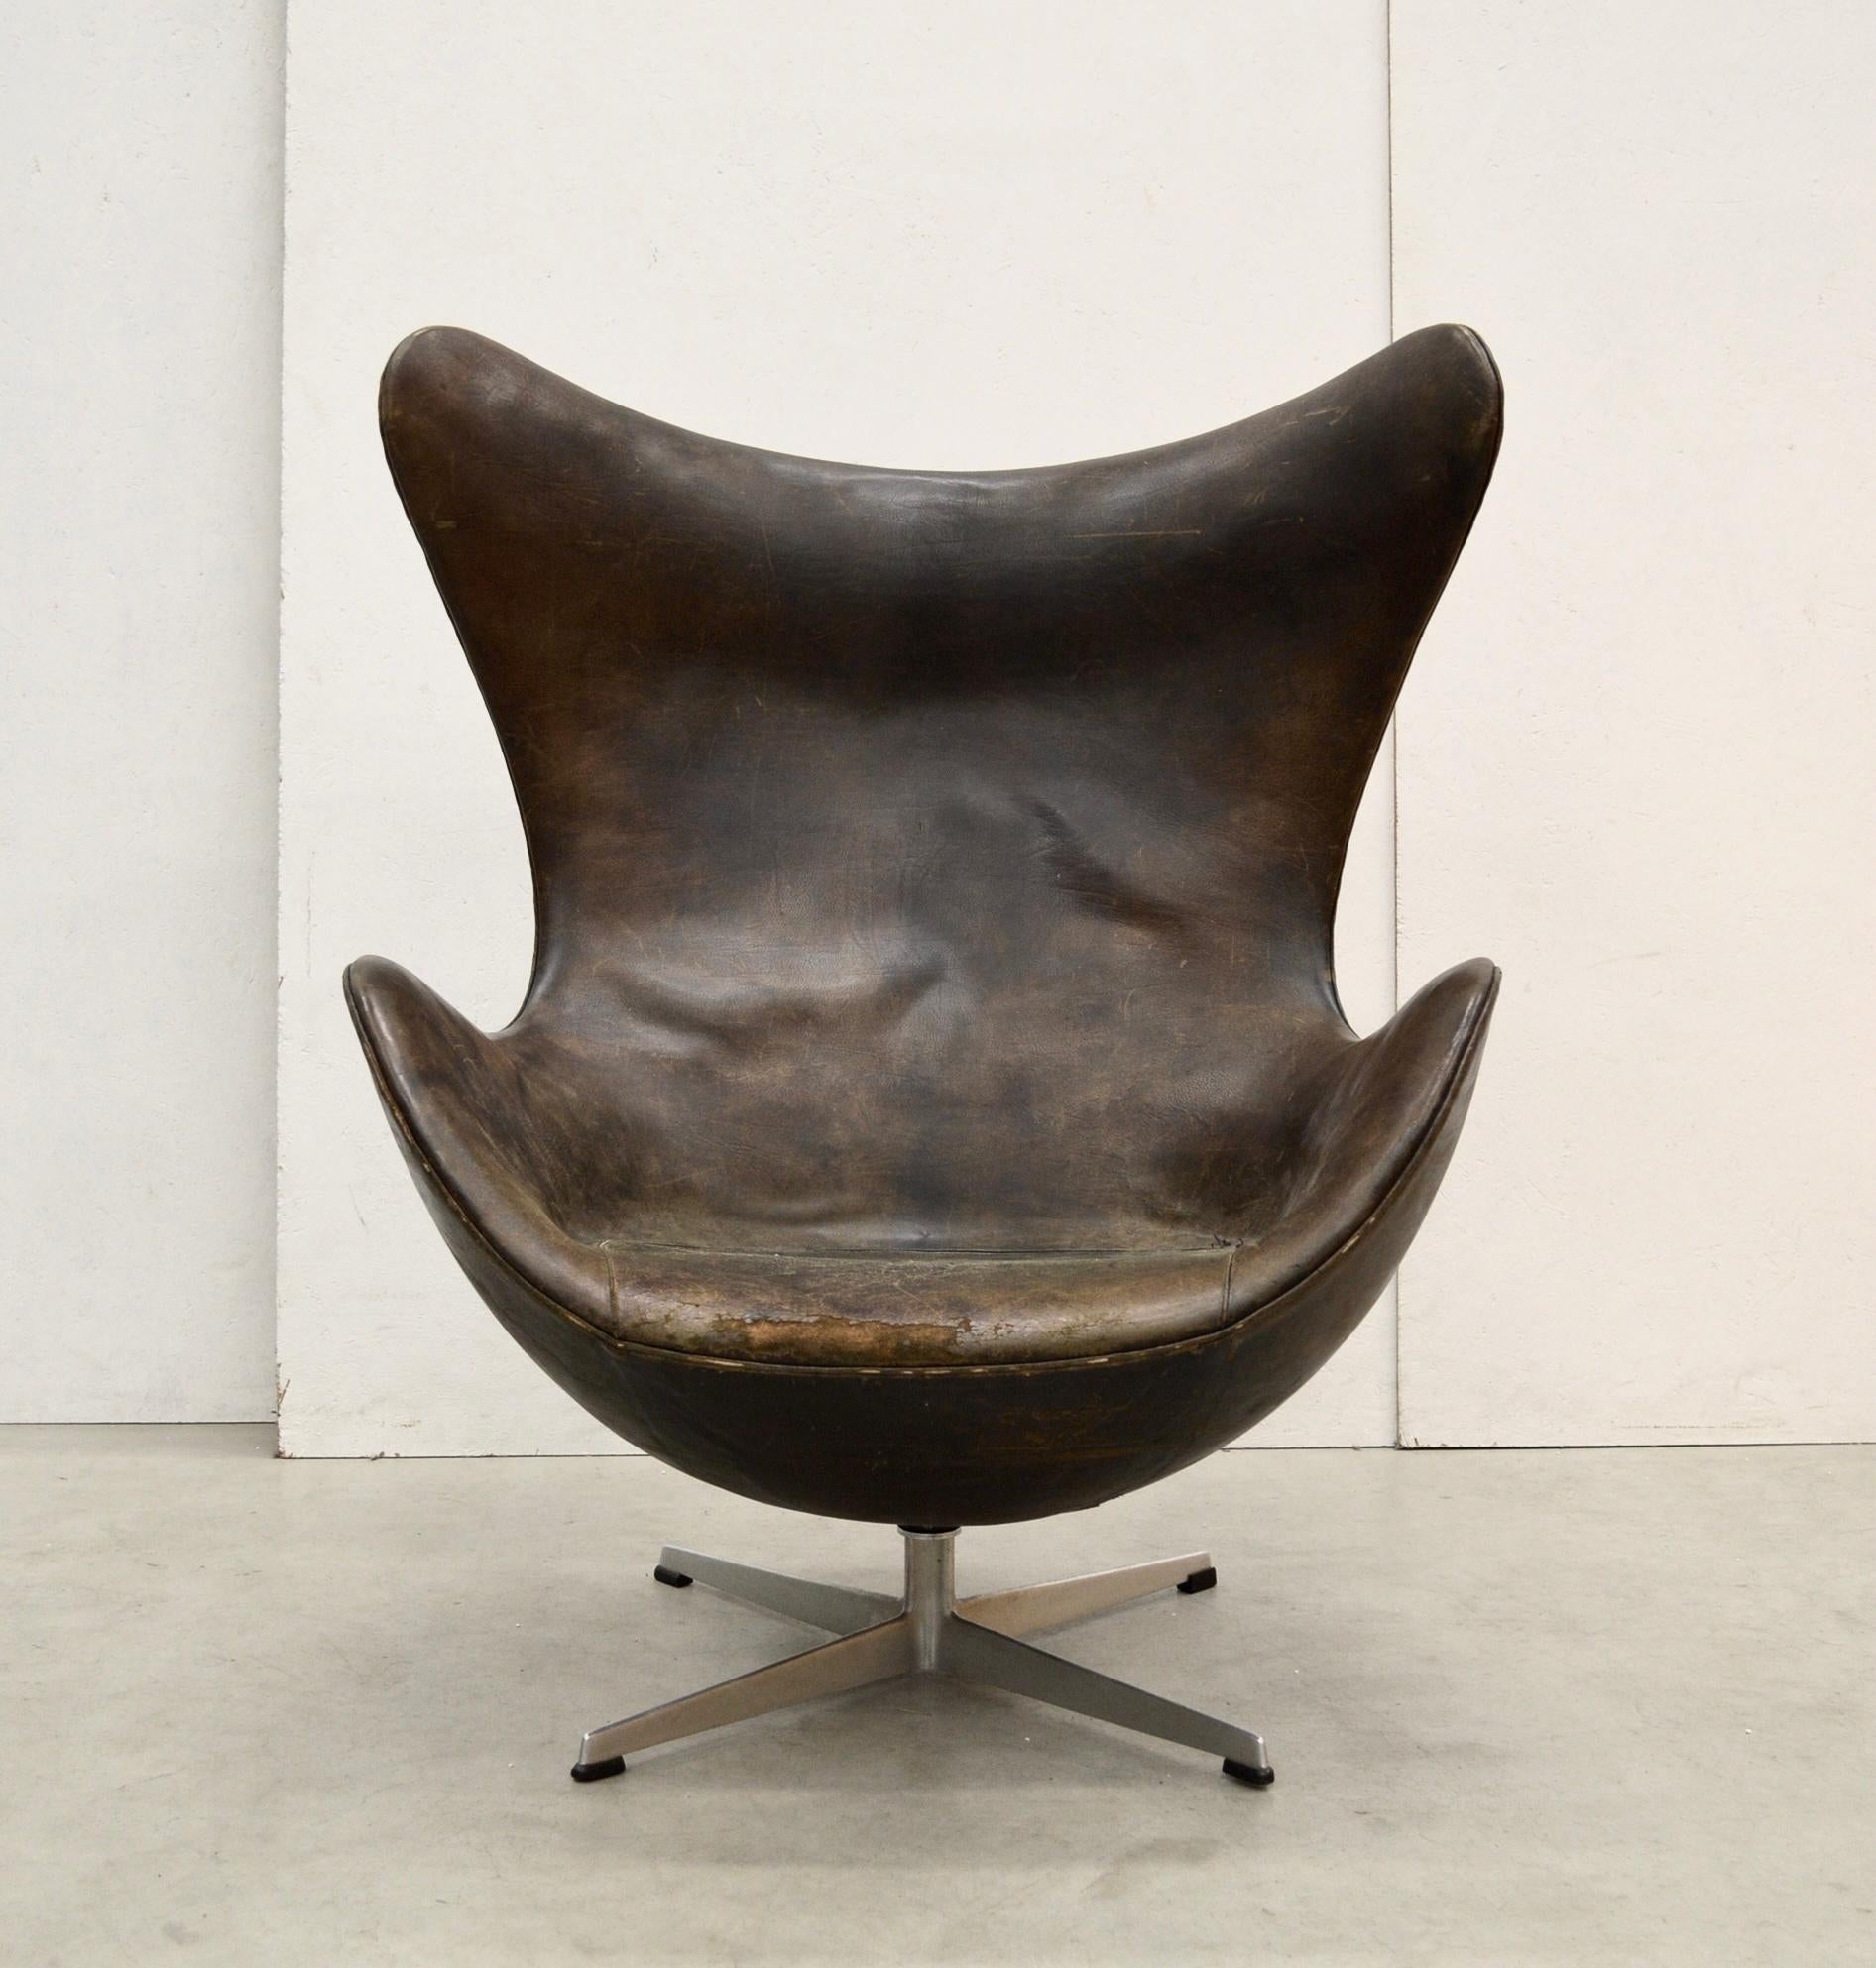 Arne Jacobsen egg chair model 3316. Original distressed upholster in dark brown leather, first serie from 1958. Produced by Fritz Hansen. Original marked by FH.